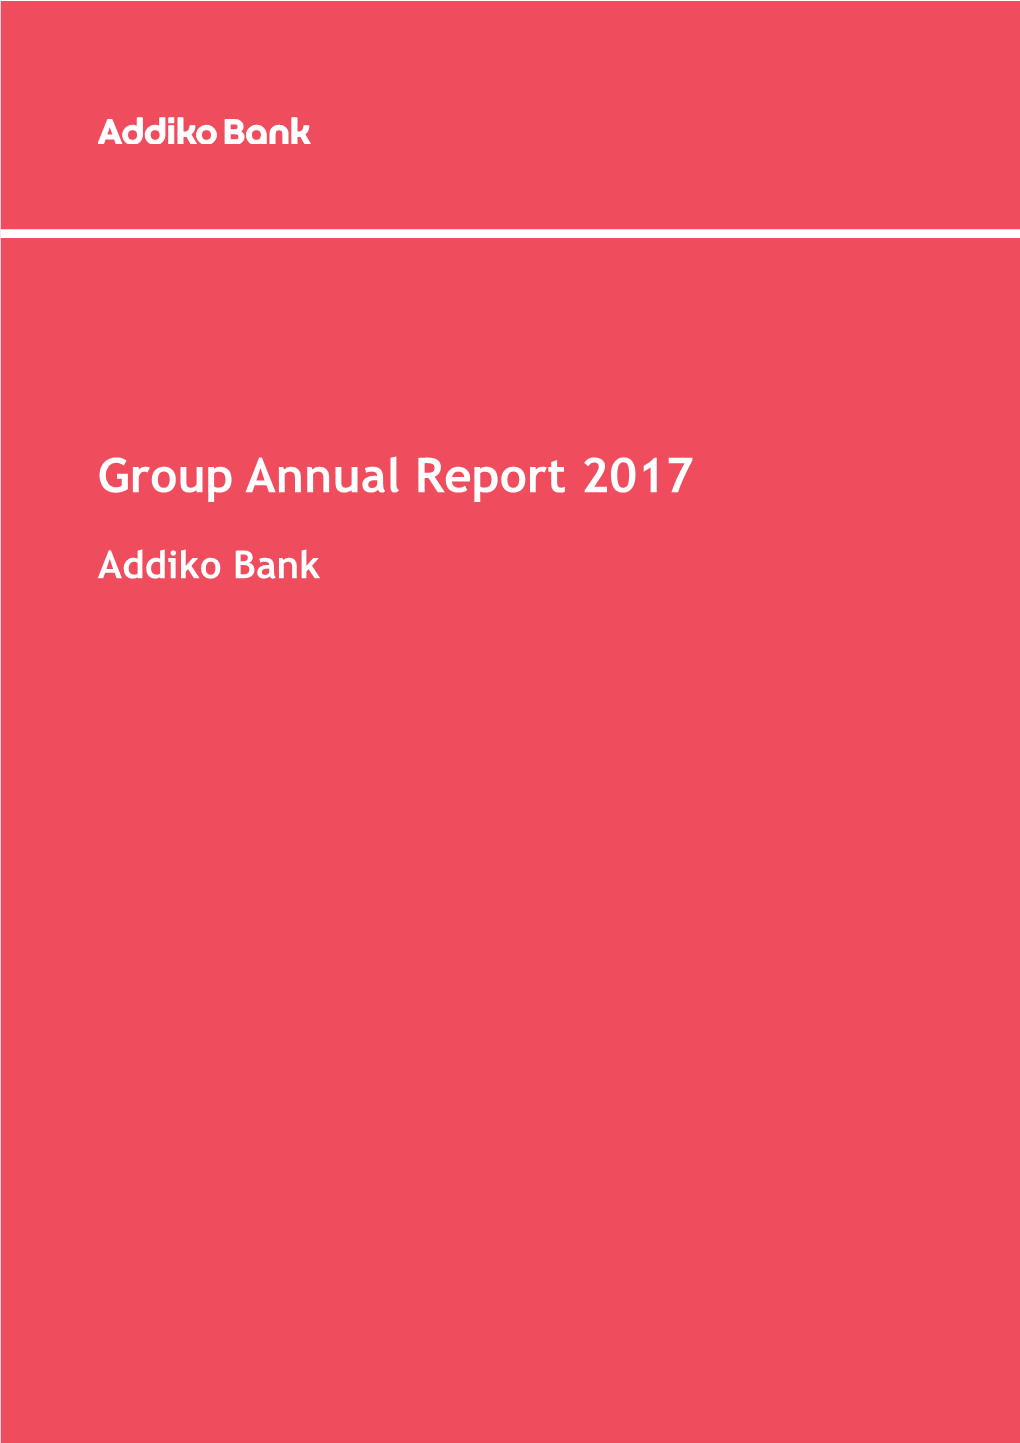 Group Annual Report 2017